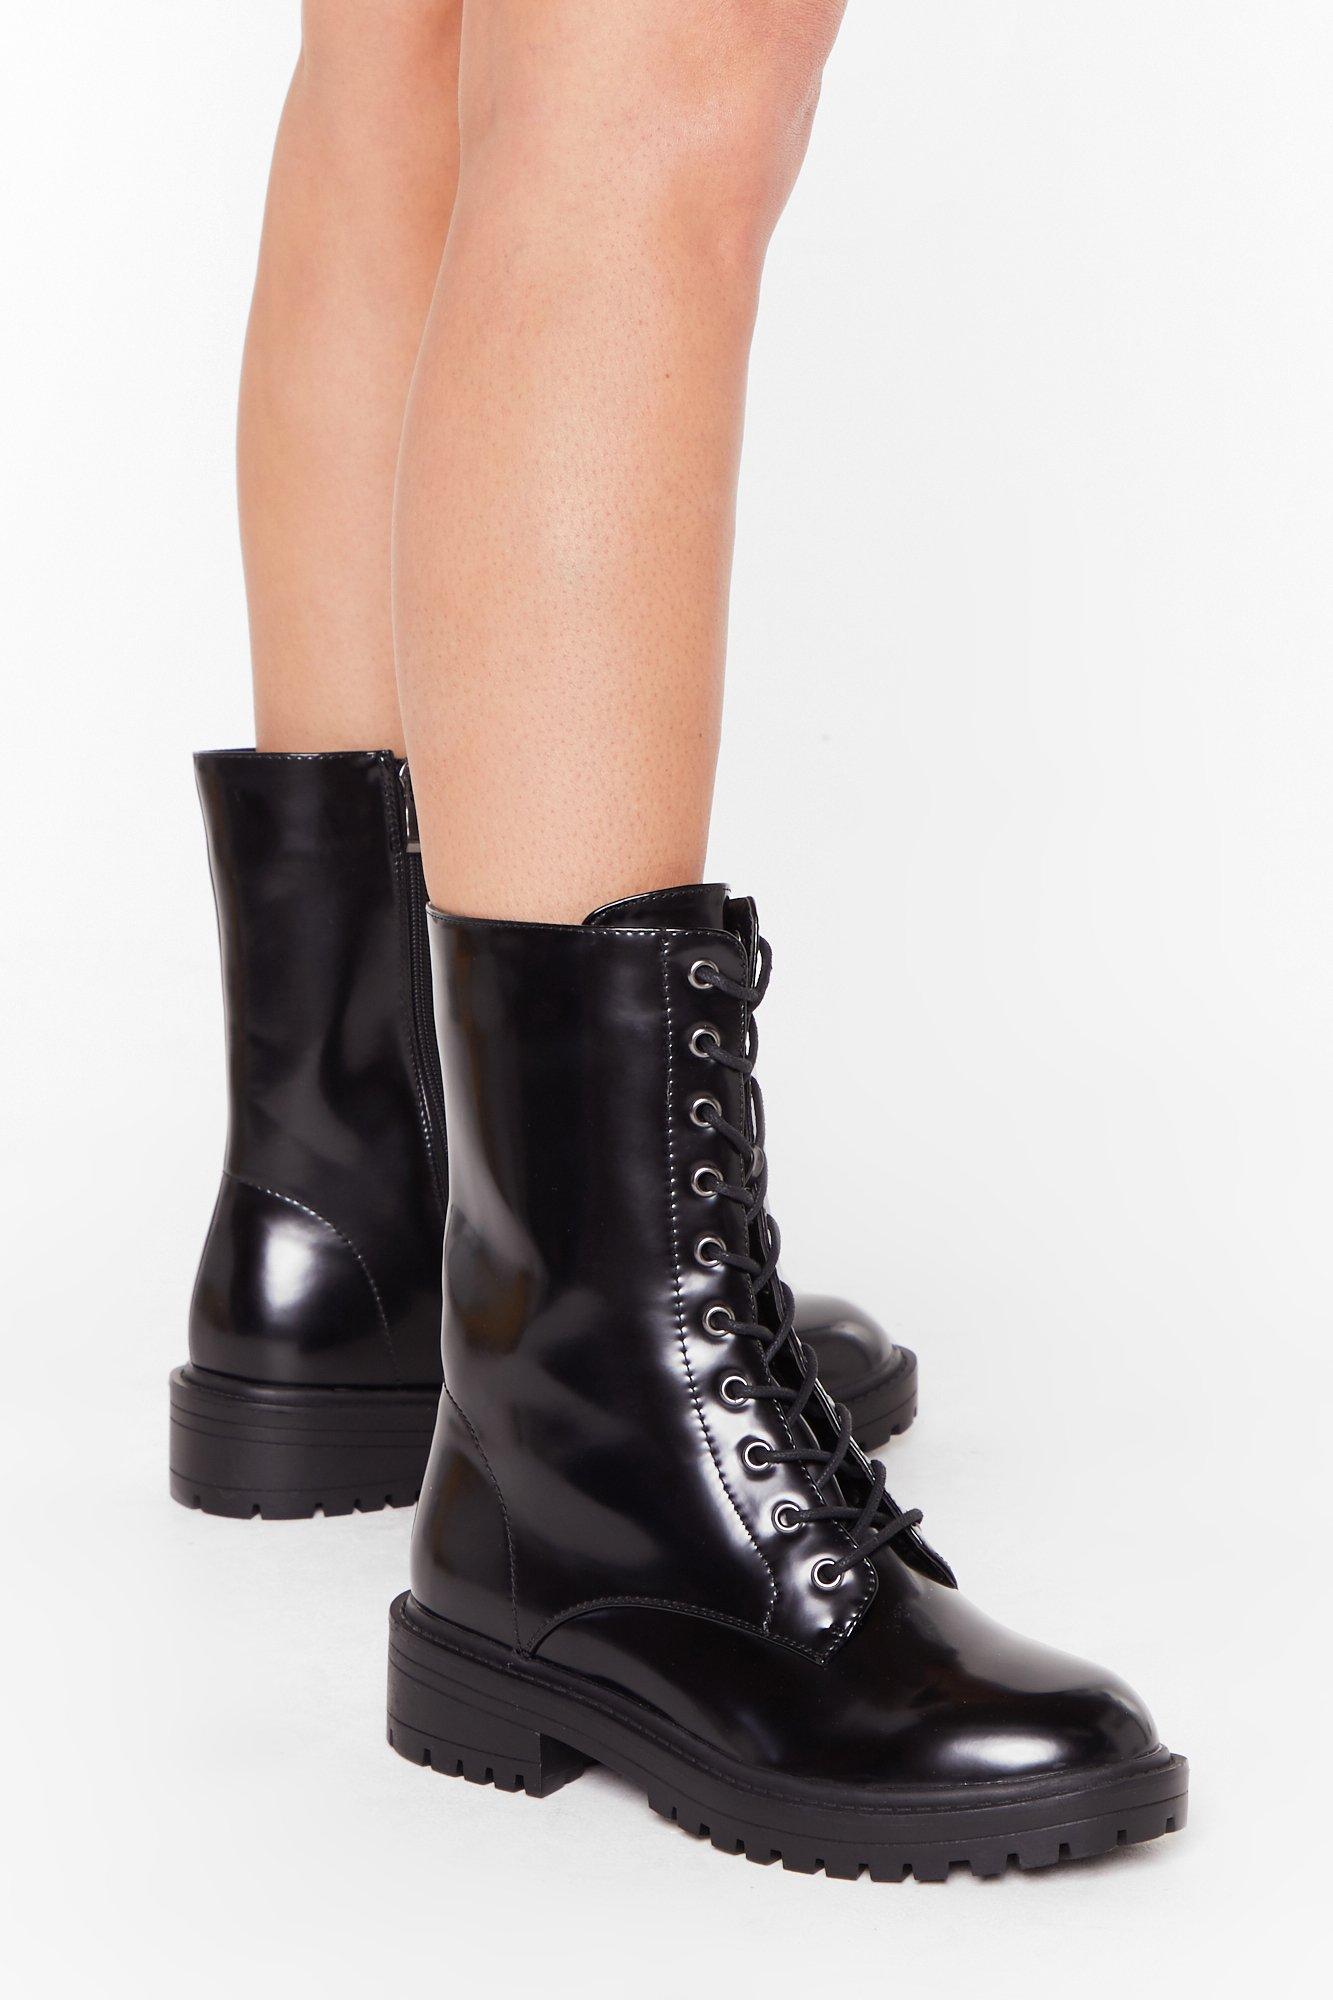 wide fit lace up boots